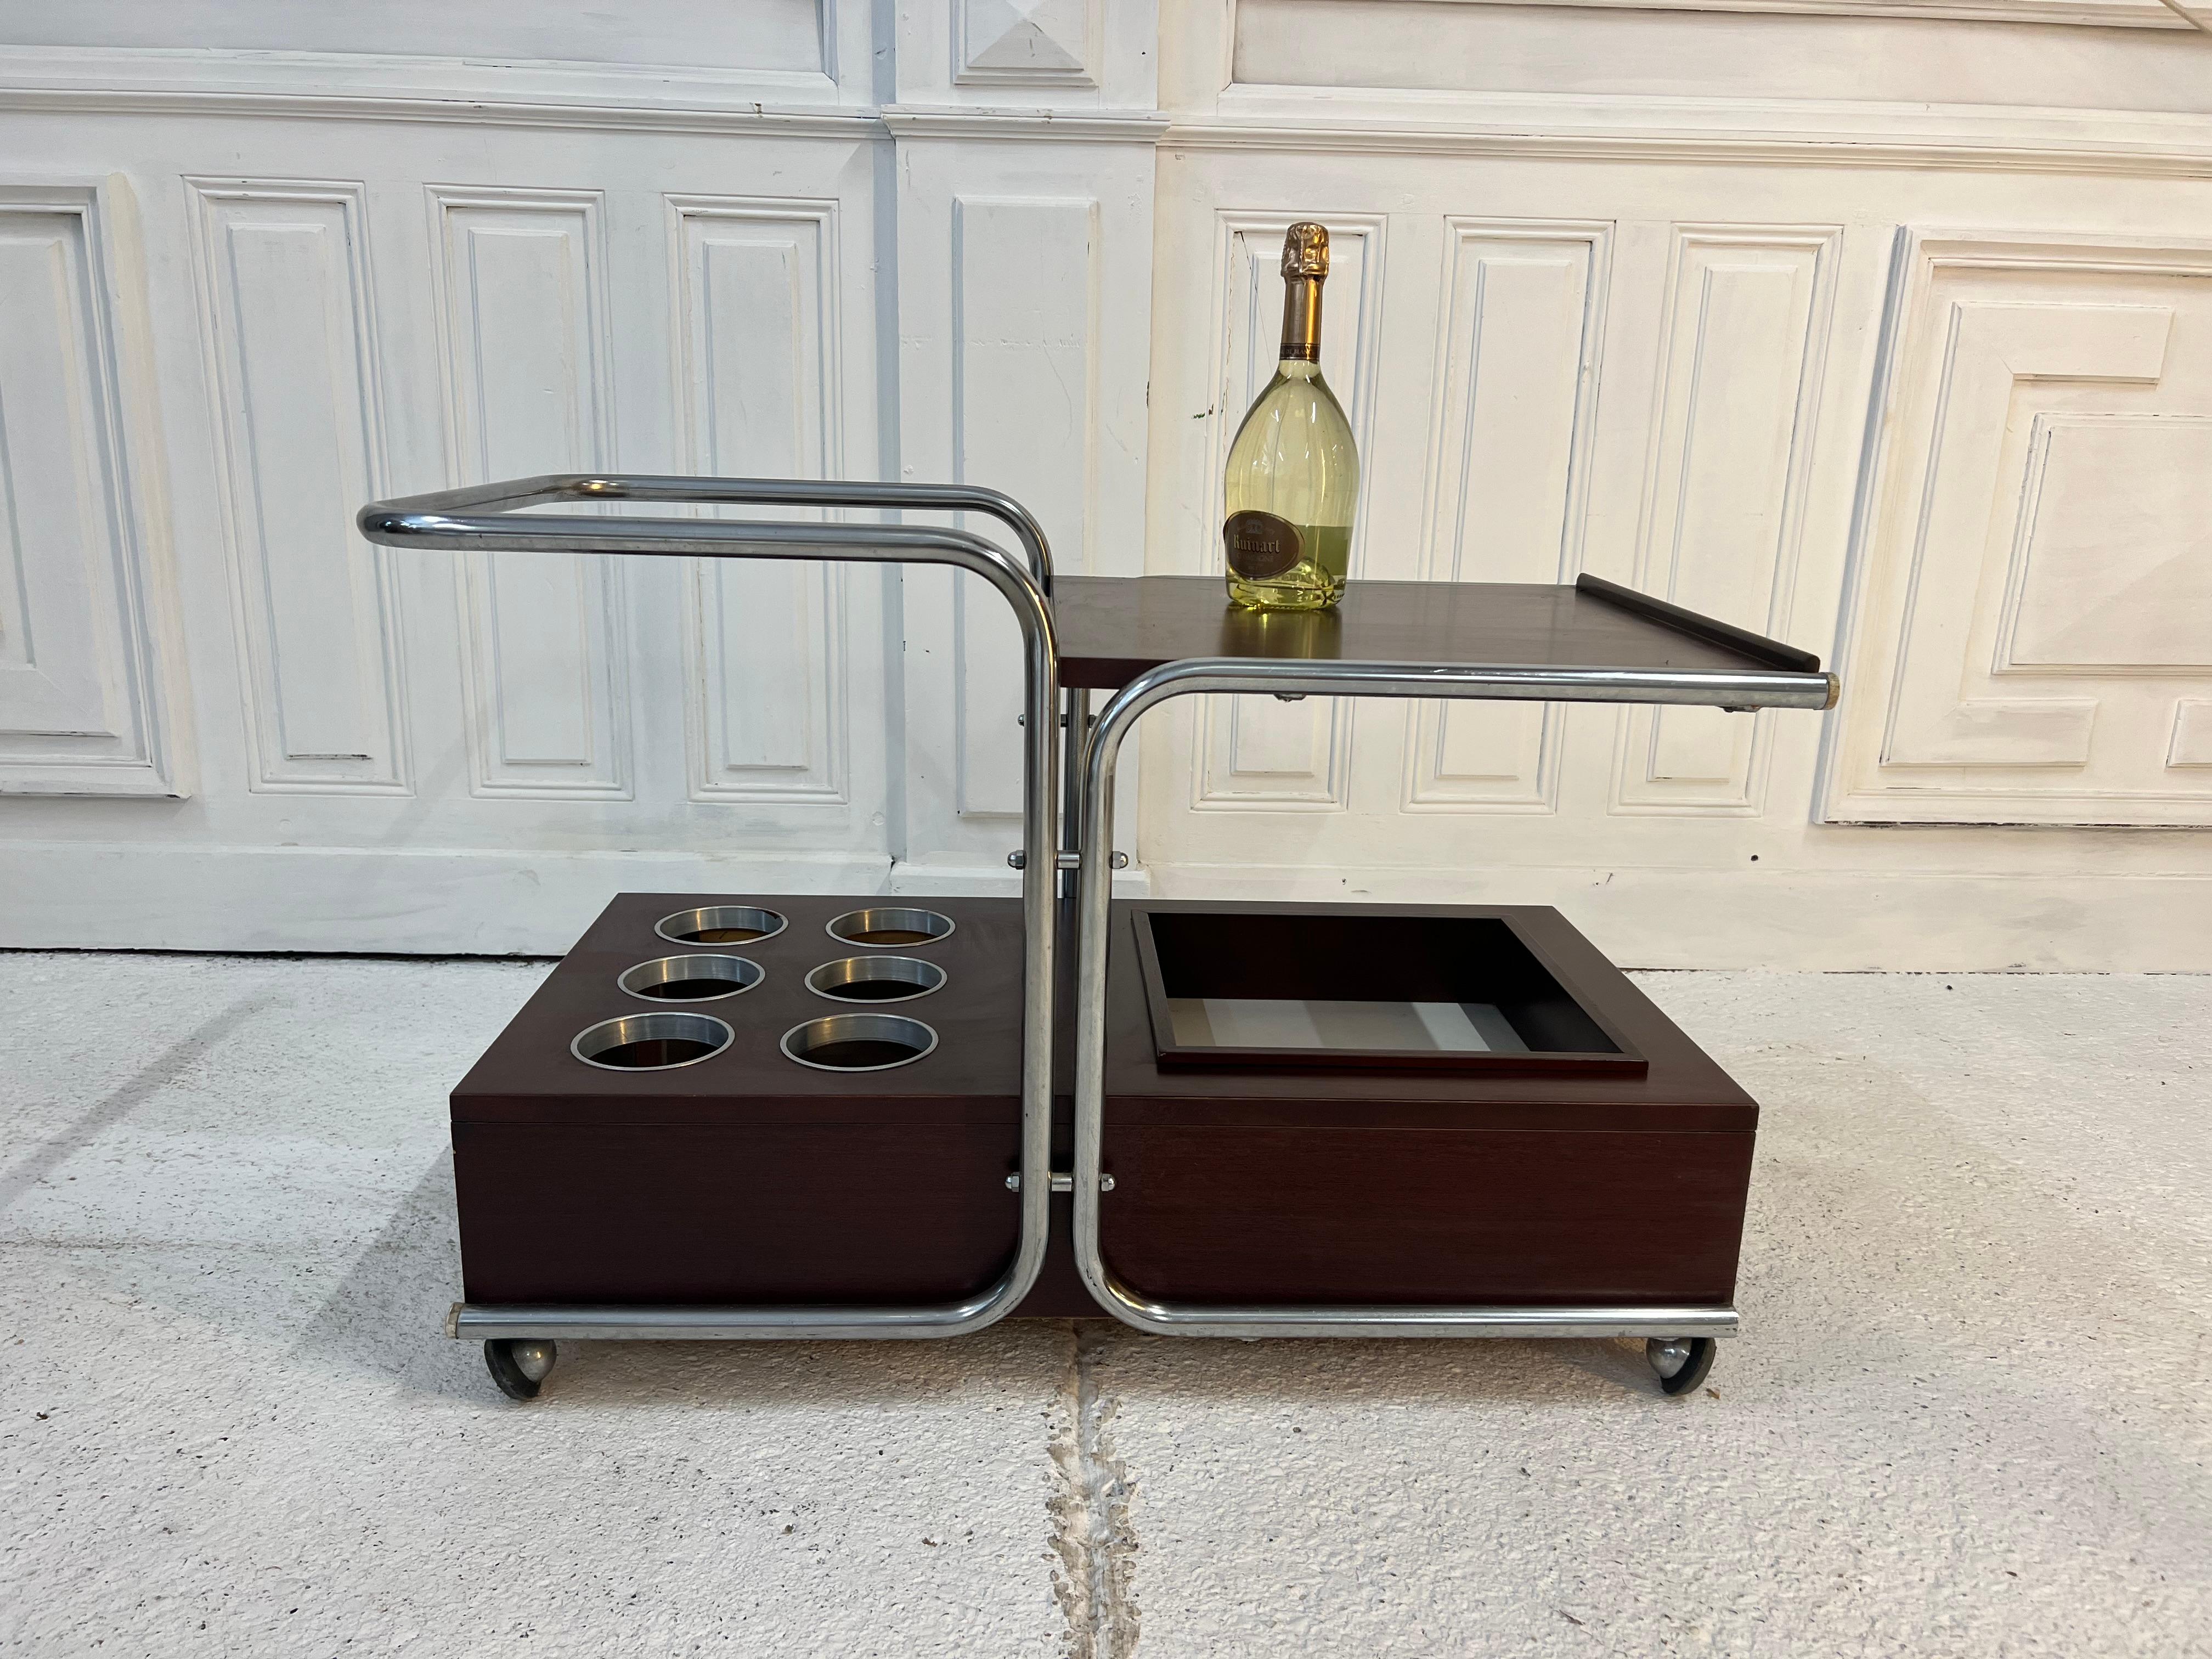 magnificent rolling bar from the 50s in chromed stainless steel tube, large bottle shelf at the bottom and mahogany top at the top
the aluminum rings for the bottles give it a real chic 1950's look
The piece you need to serve your guest 
